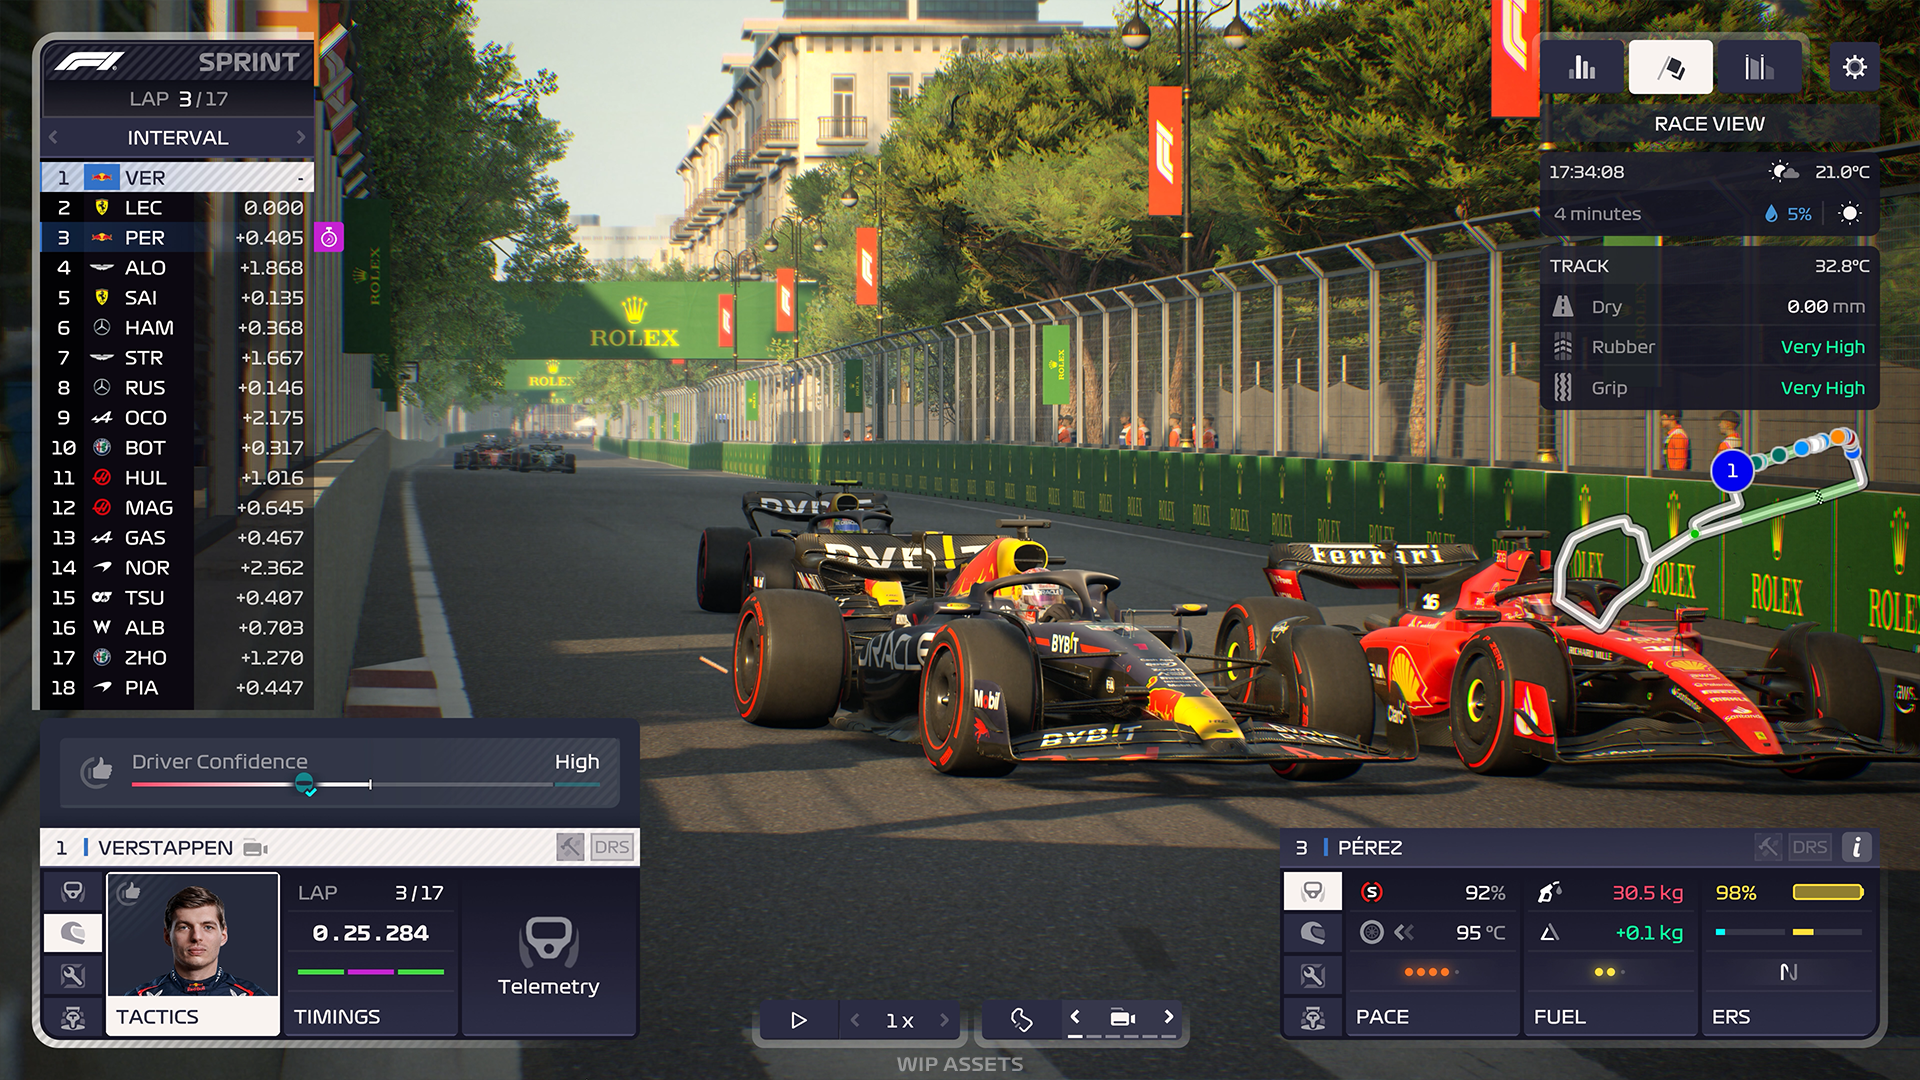 F1 Manager 2023 Releases This Summer - Trailer, Screenshots, Features